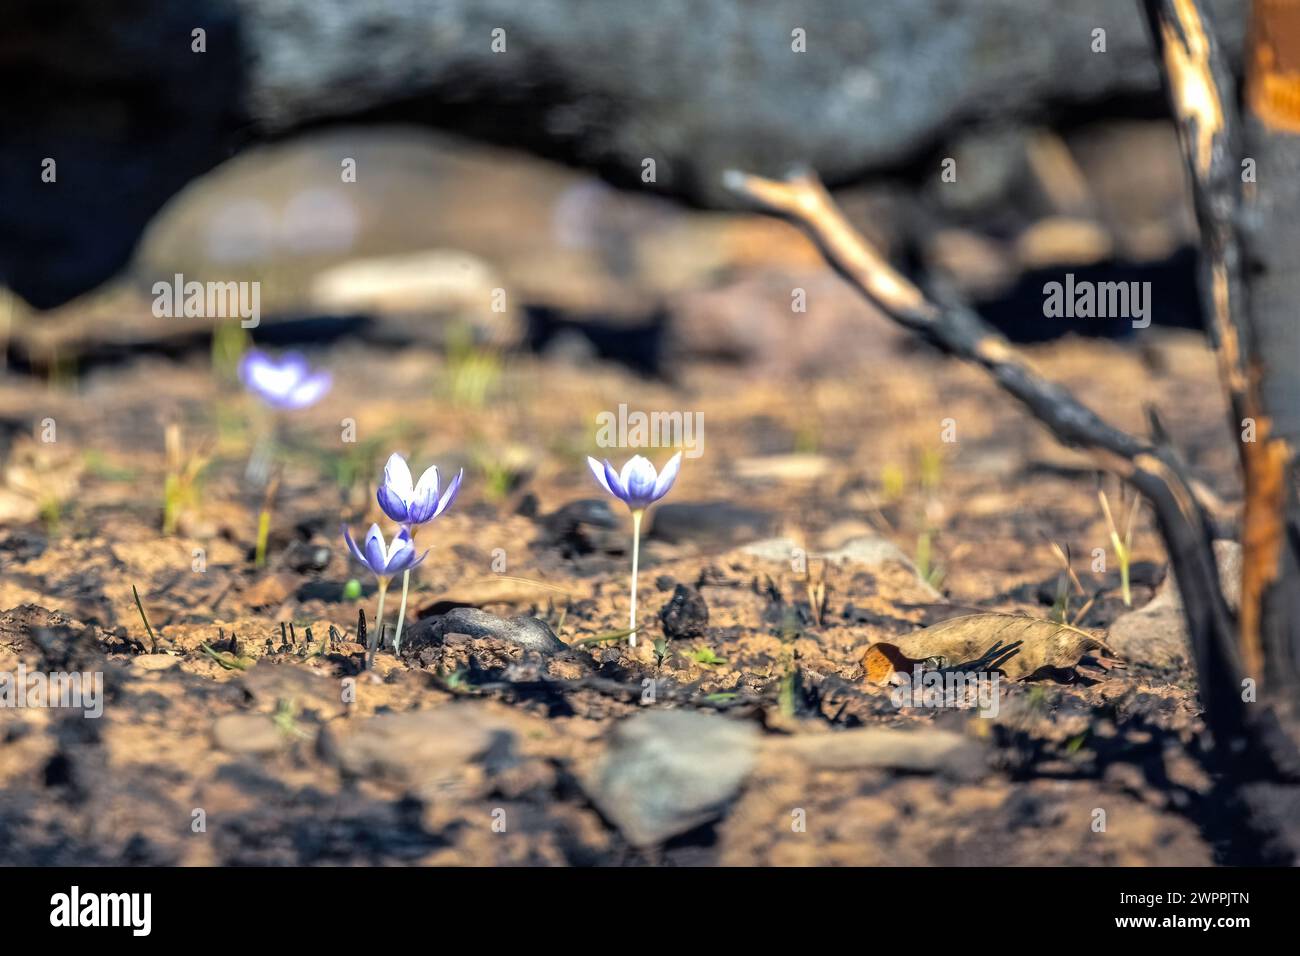 Crocus pulchellus or hairy crocus early spring purple flower after the wildfires, nature reborn Stock Photo